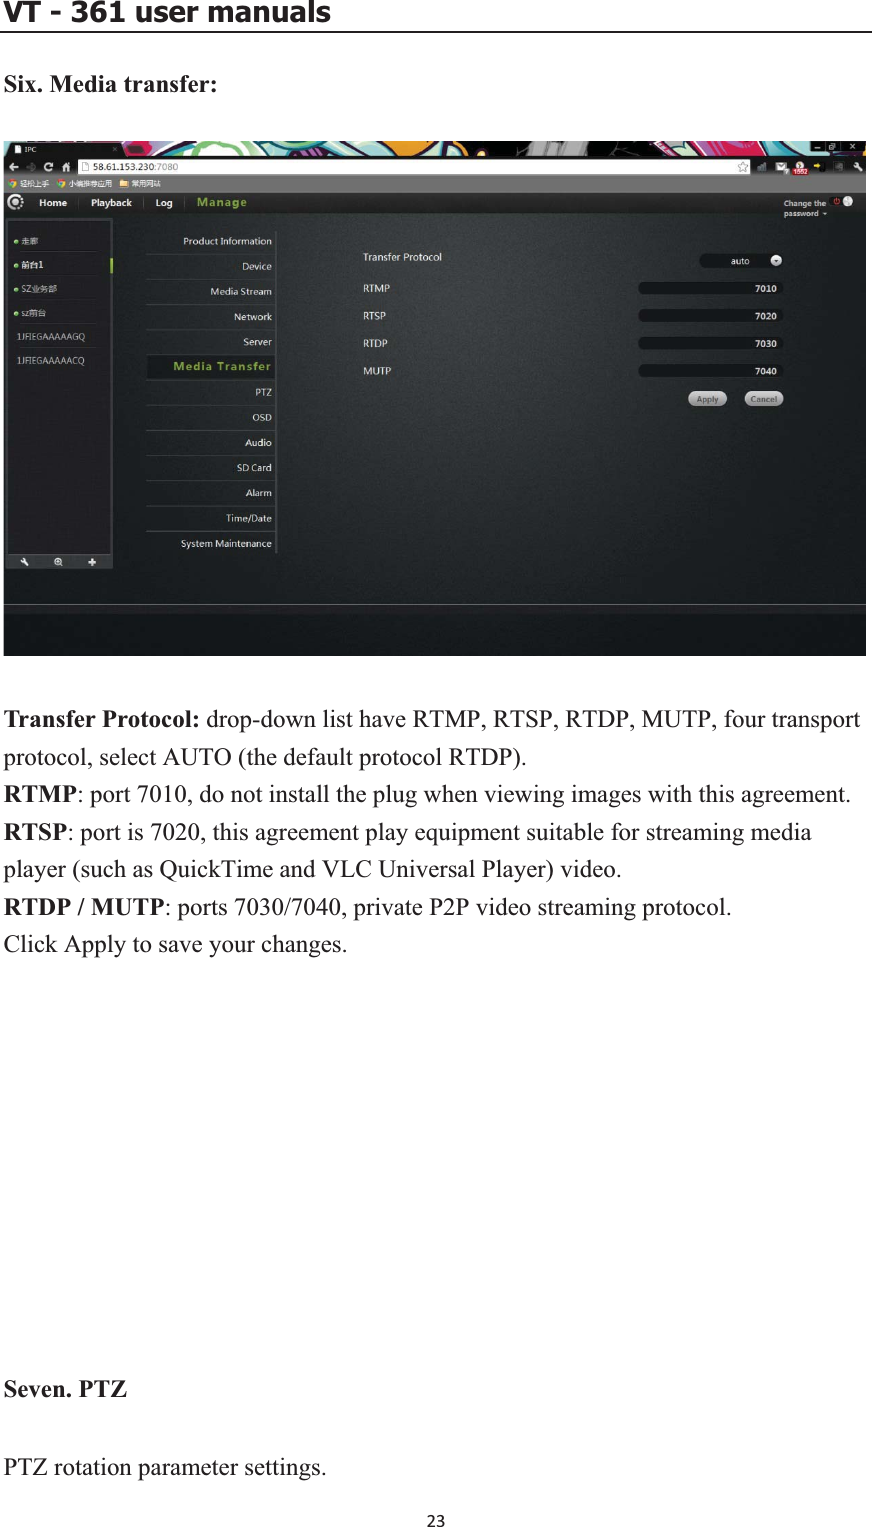 VT - 361 user manualsSix. Media transfer: Transfer Protocol: drop-down list have RTMP, RTSP, RTDP, MUTP, four transport protocol, select AUTO (the default protocol RTDP). RTMP: port 7010, do not install the plug when viewing images with this agreement. ing media LC Universal Player) video. TDP / MUTP: ports 7030/7040, private P2P video streaming protocol. Click Apply to save your changes. Seven. PTZ PTZ rotation parameter settings. RTSP: port is 7020, this agreement play equipment suitable for streamplayer (such as QuickTime and VR23